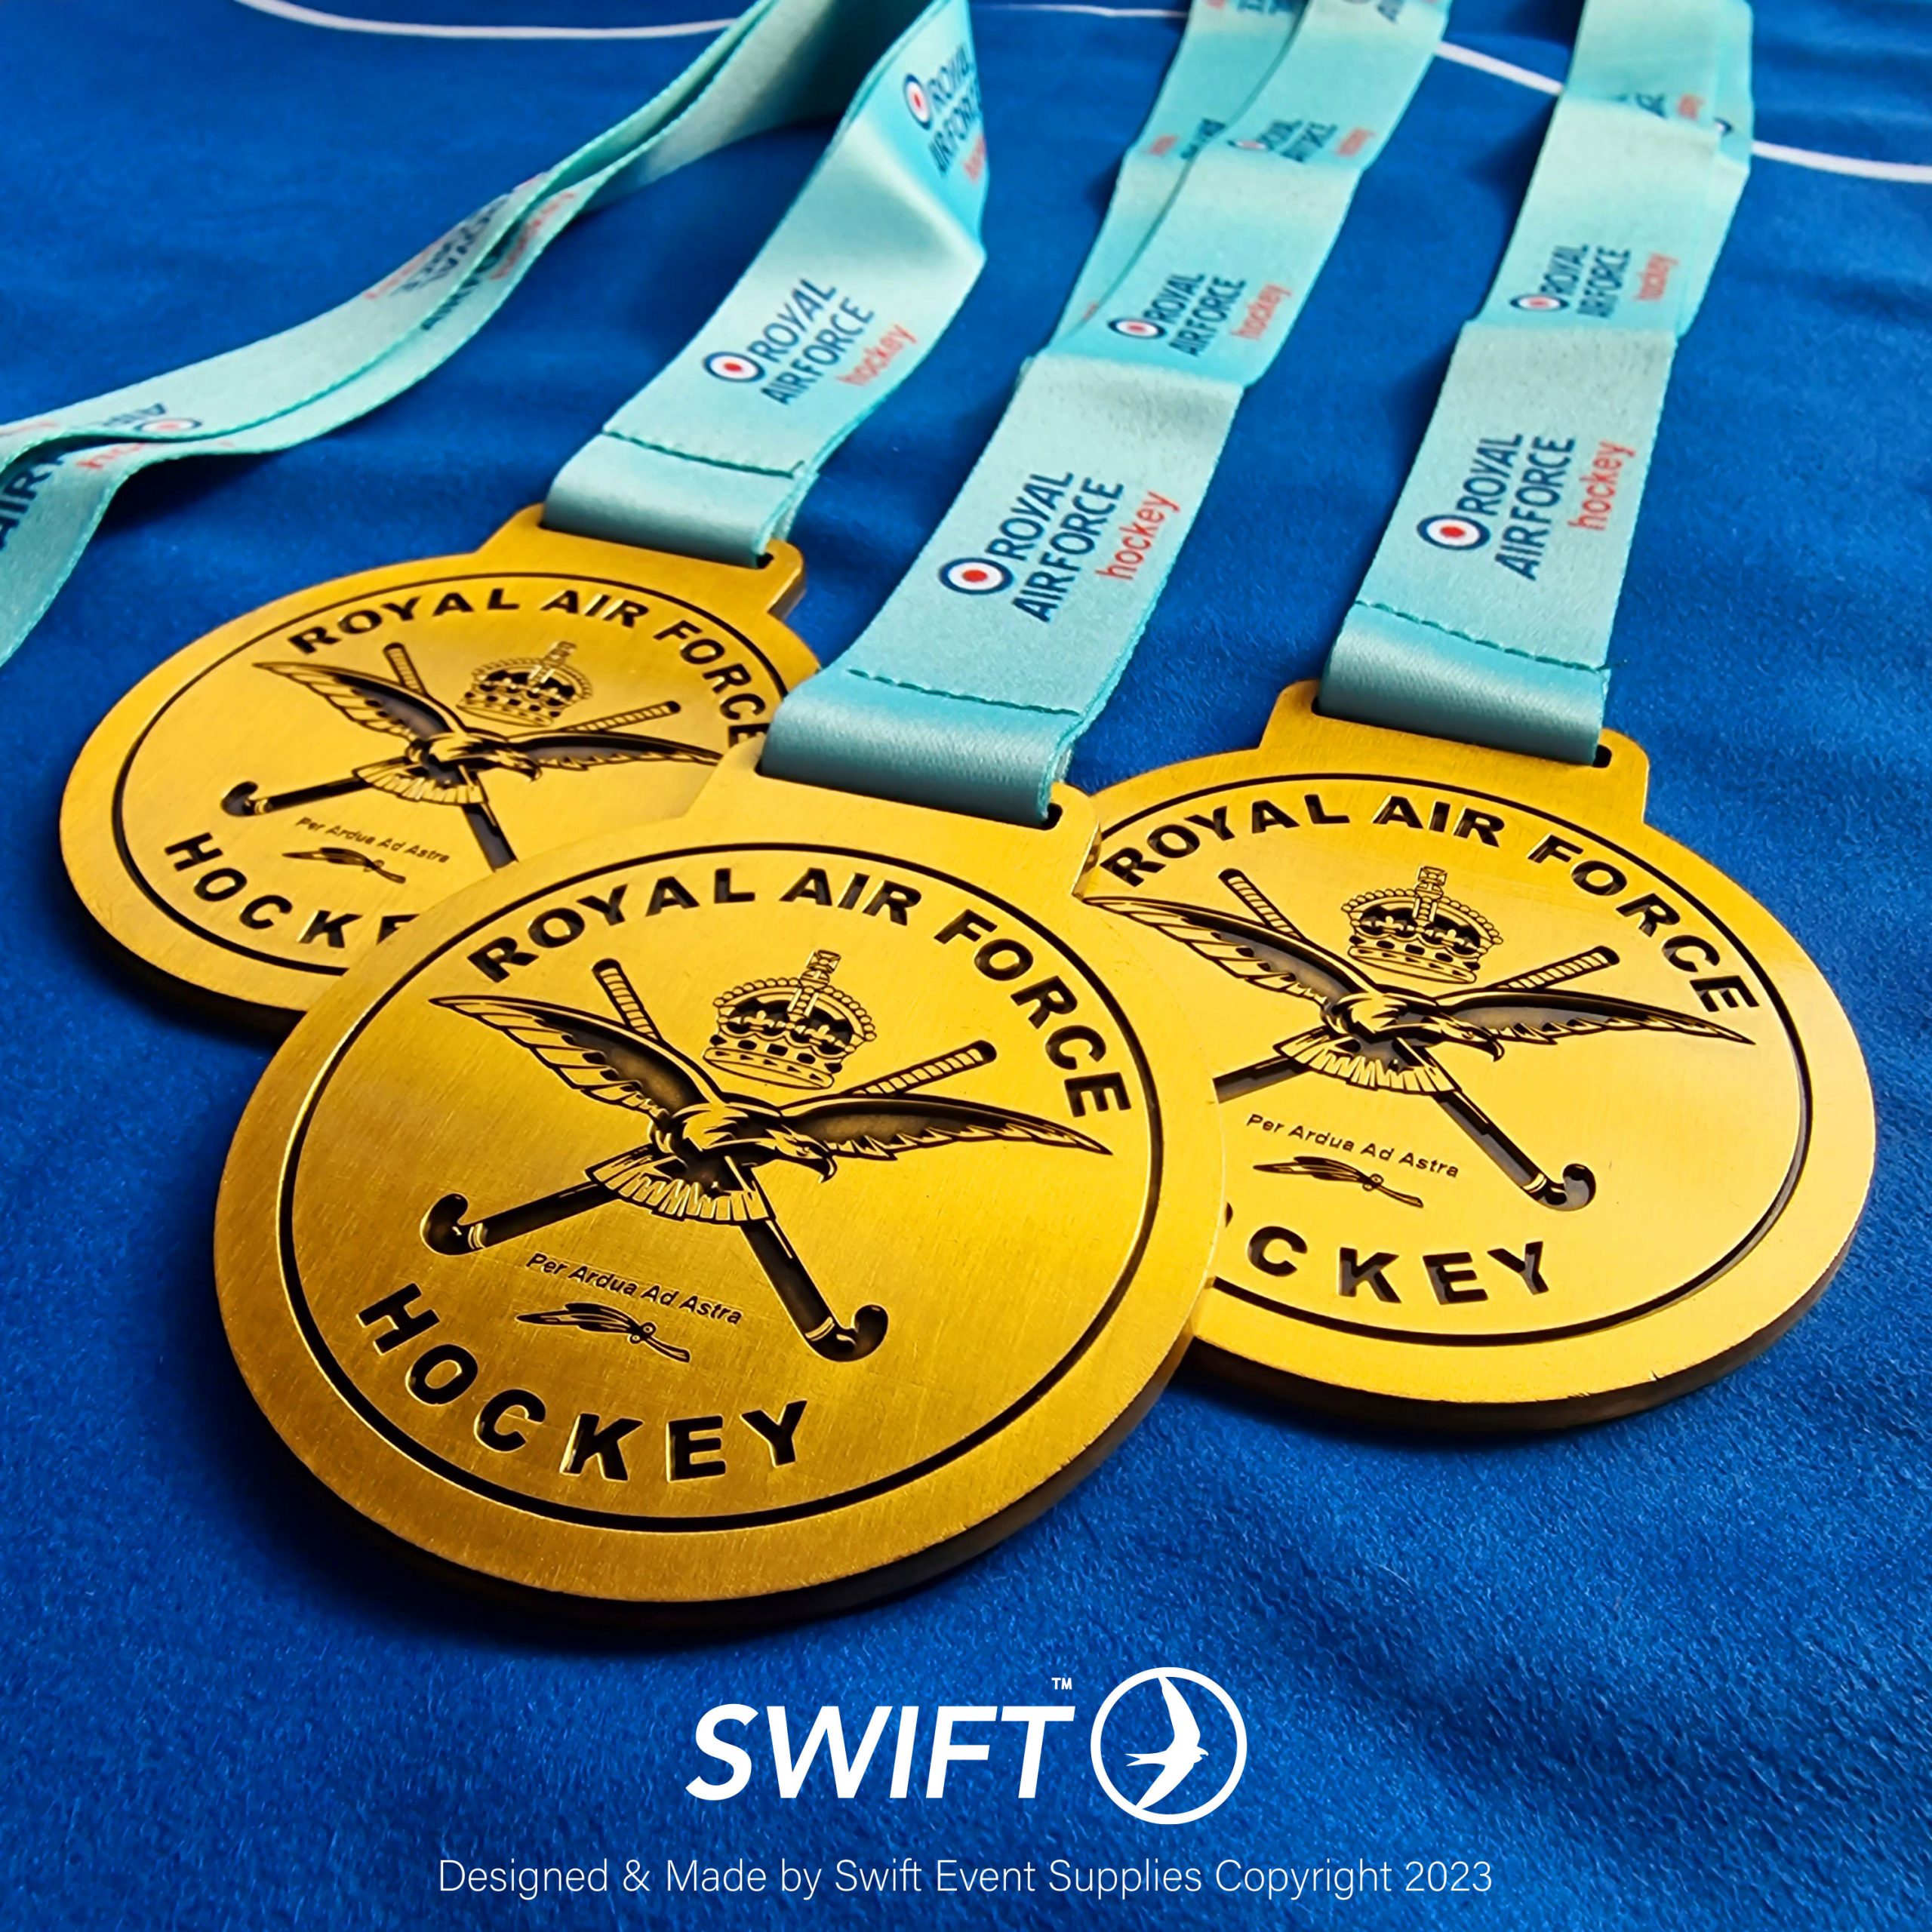 Bespoke medals commissioned by the Royal Air Force. Sports Medals designed and made in the UK.